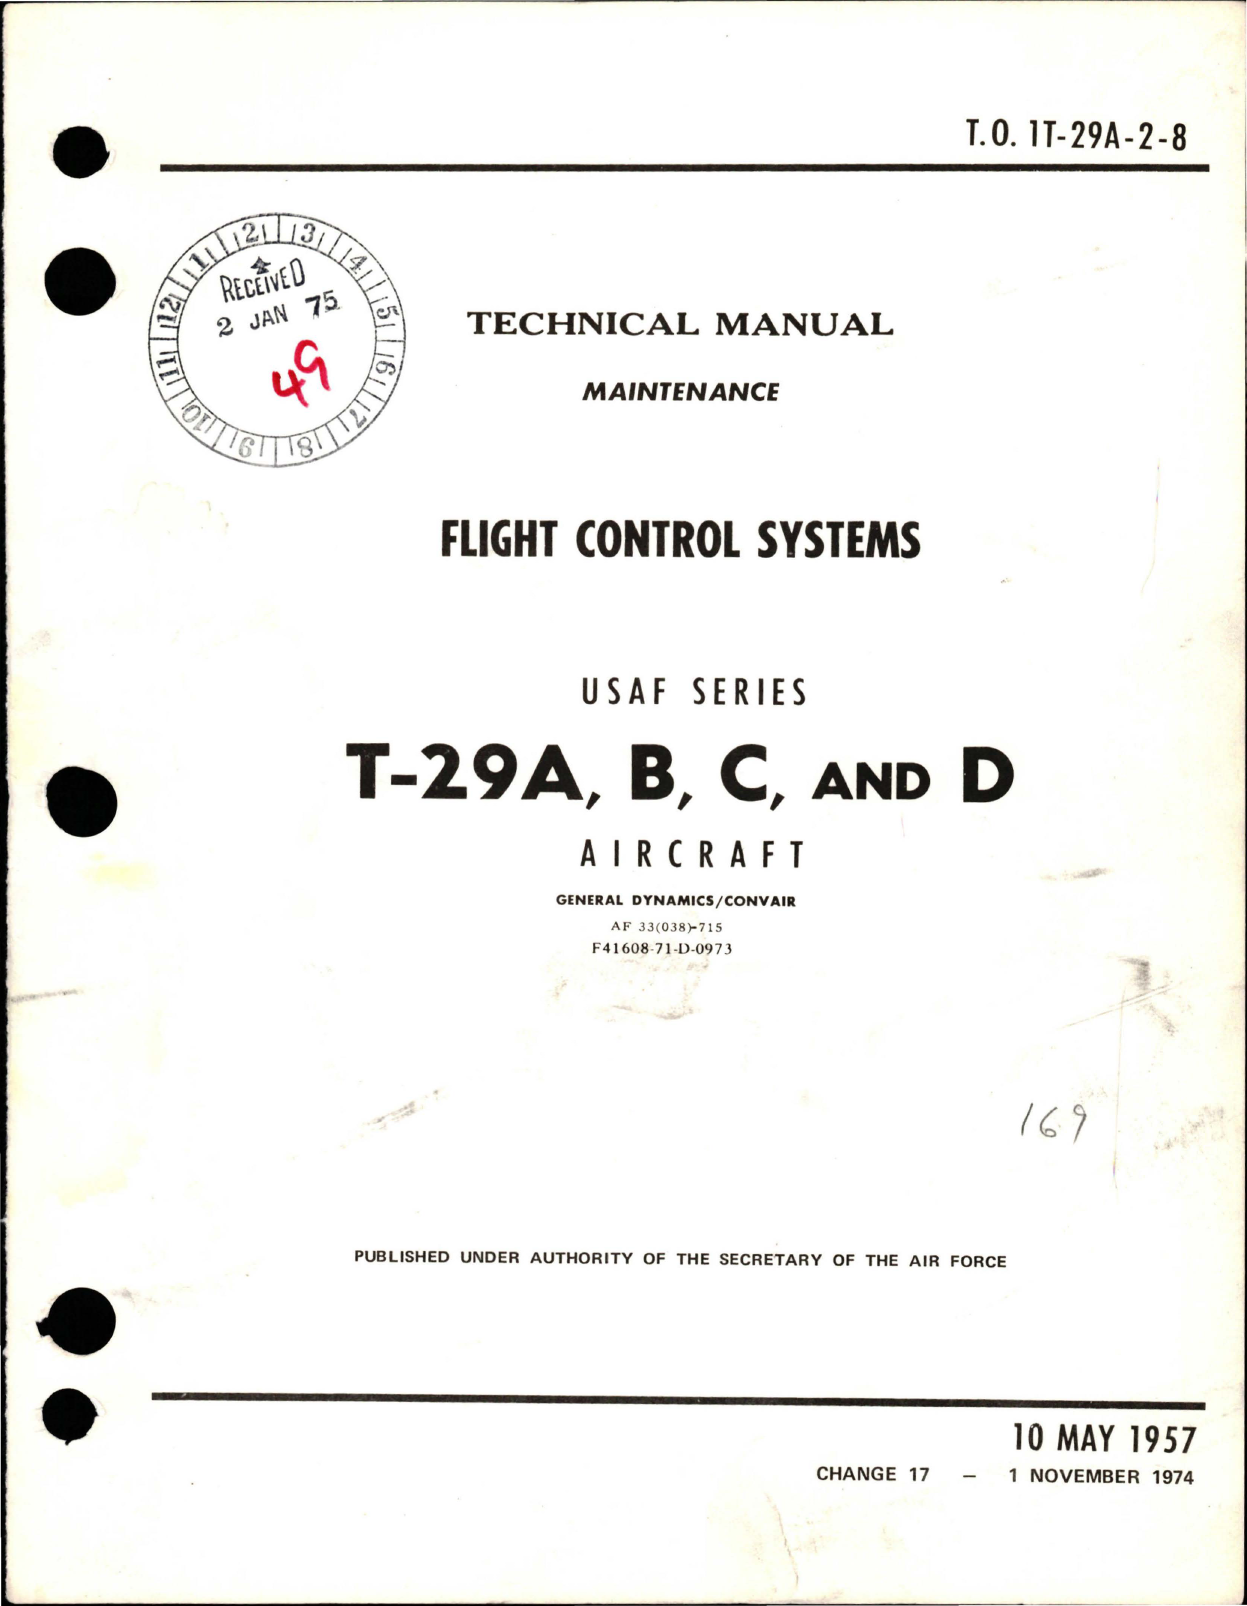 Sample page 1 from AirCorps Library document: Maintenance for Flight Control Systems, T-29A, T-29B, T-29C and T-29D